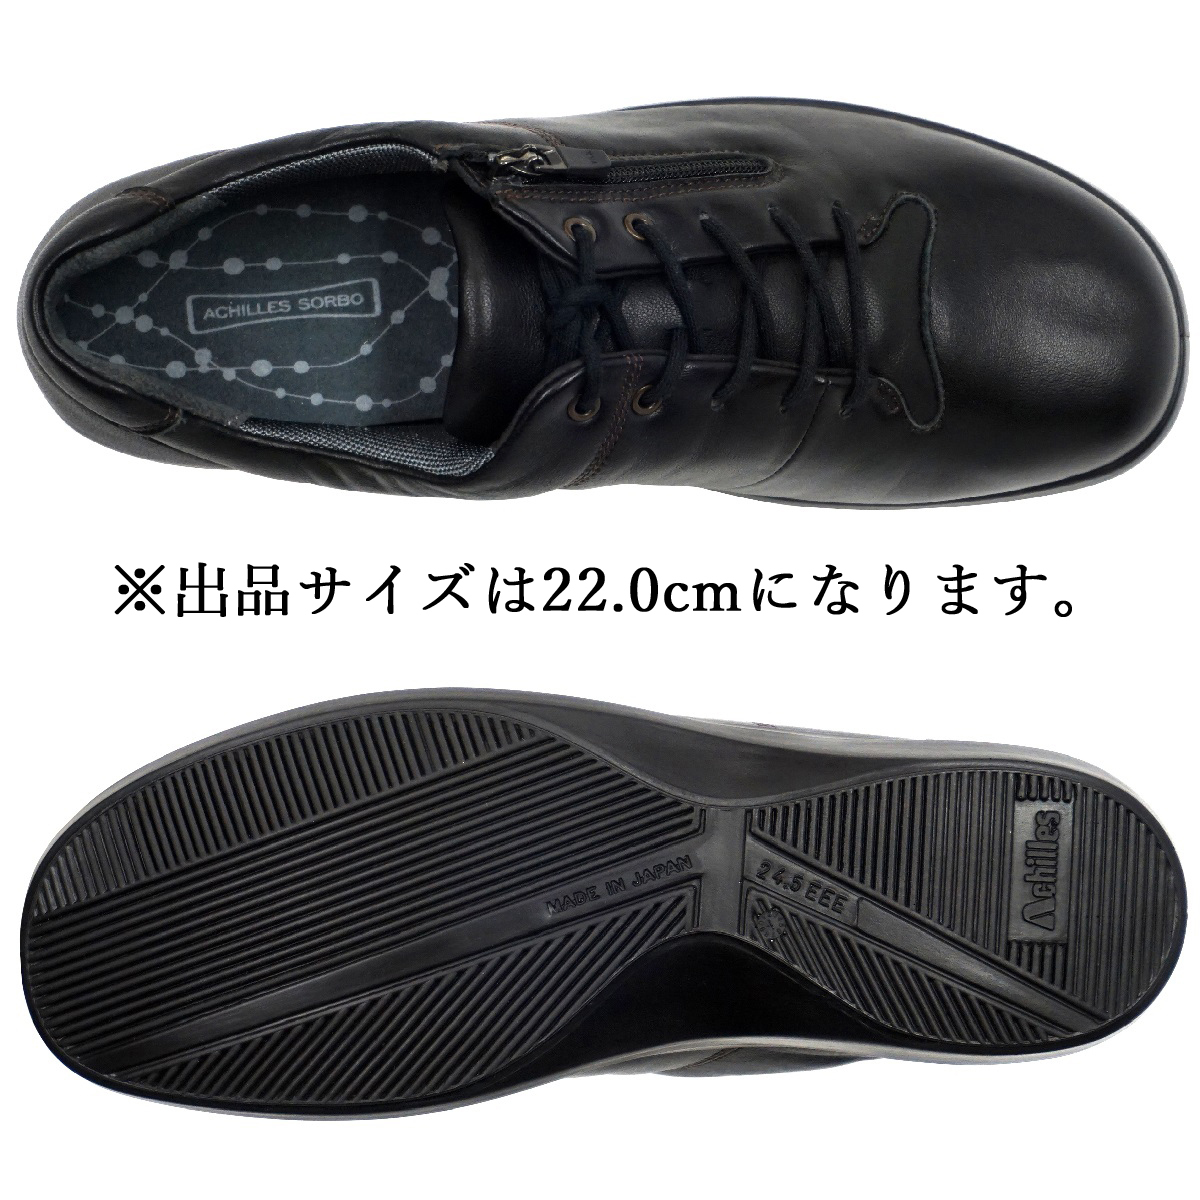 SRL2780 black 22.0cm Achilles sorubo lady's walking shoes shoes 3E Achilles SORBO woman original leather sheep leather made in Japan 